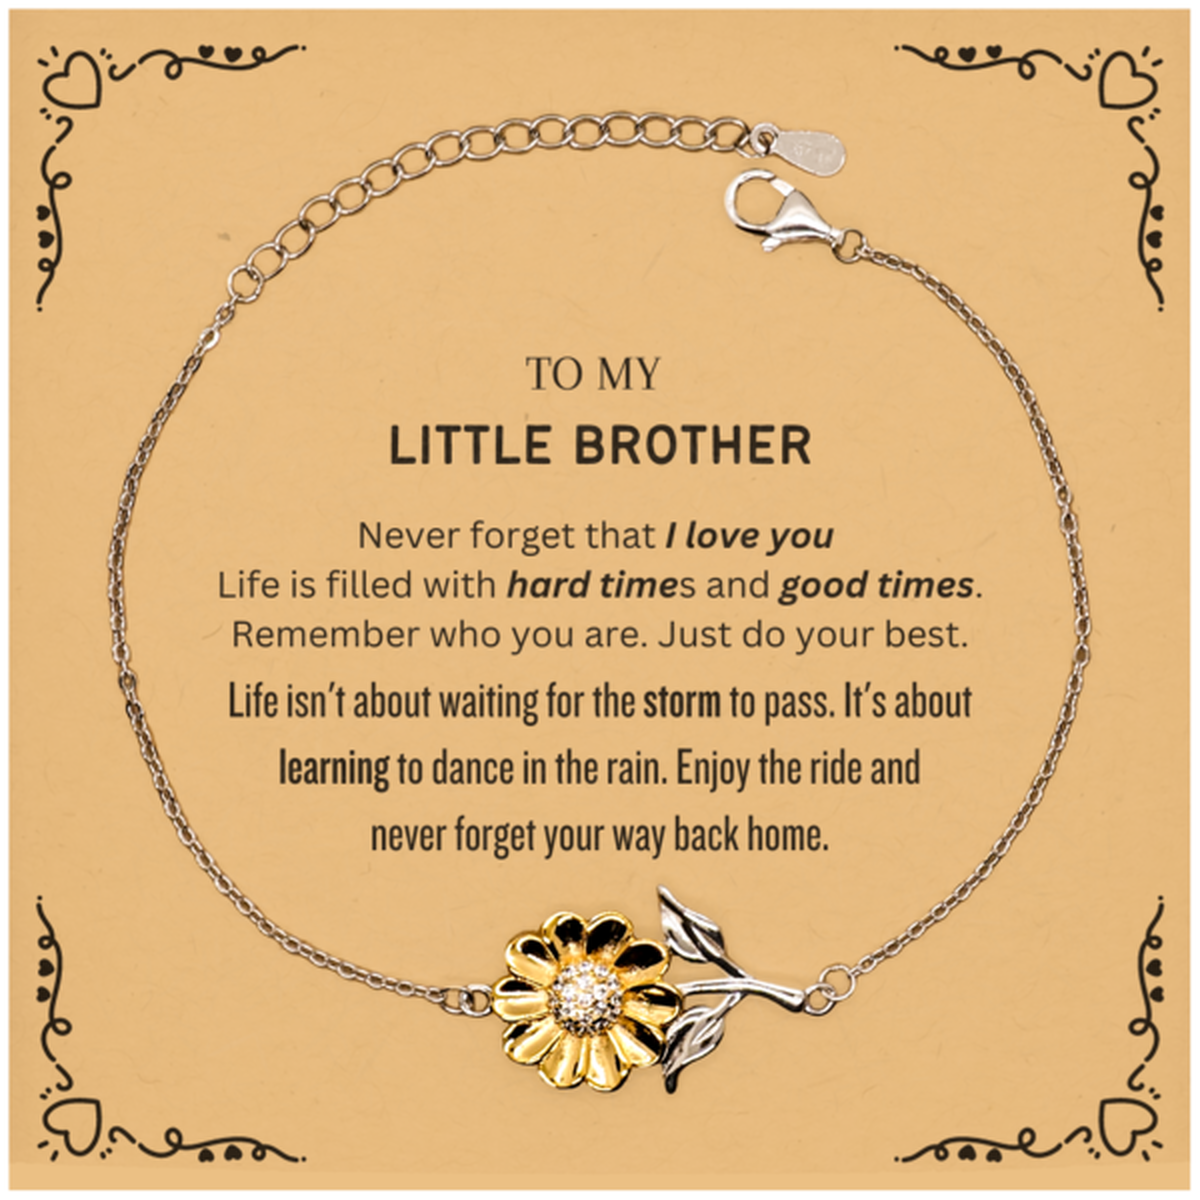 Christmas Little Brother Sunflower Bracelet Gifts, To My Little Brother Birthday Thank You Gifts For Little Brother, Graduation Unique Gifts For Little Brother To My Little Brother Never forget that I love you life is filled with hard times and good times